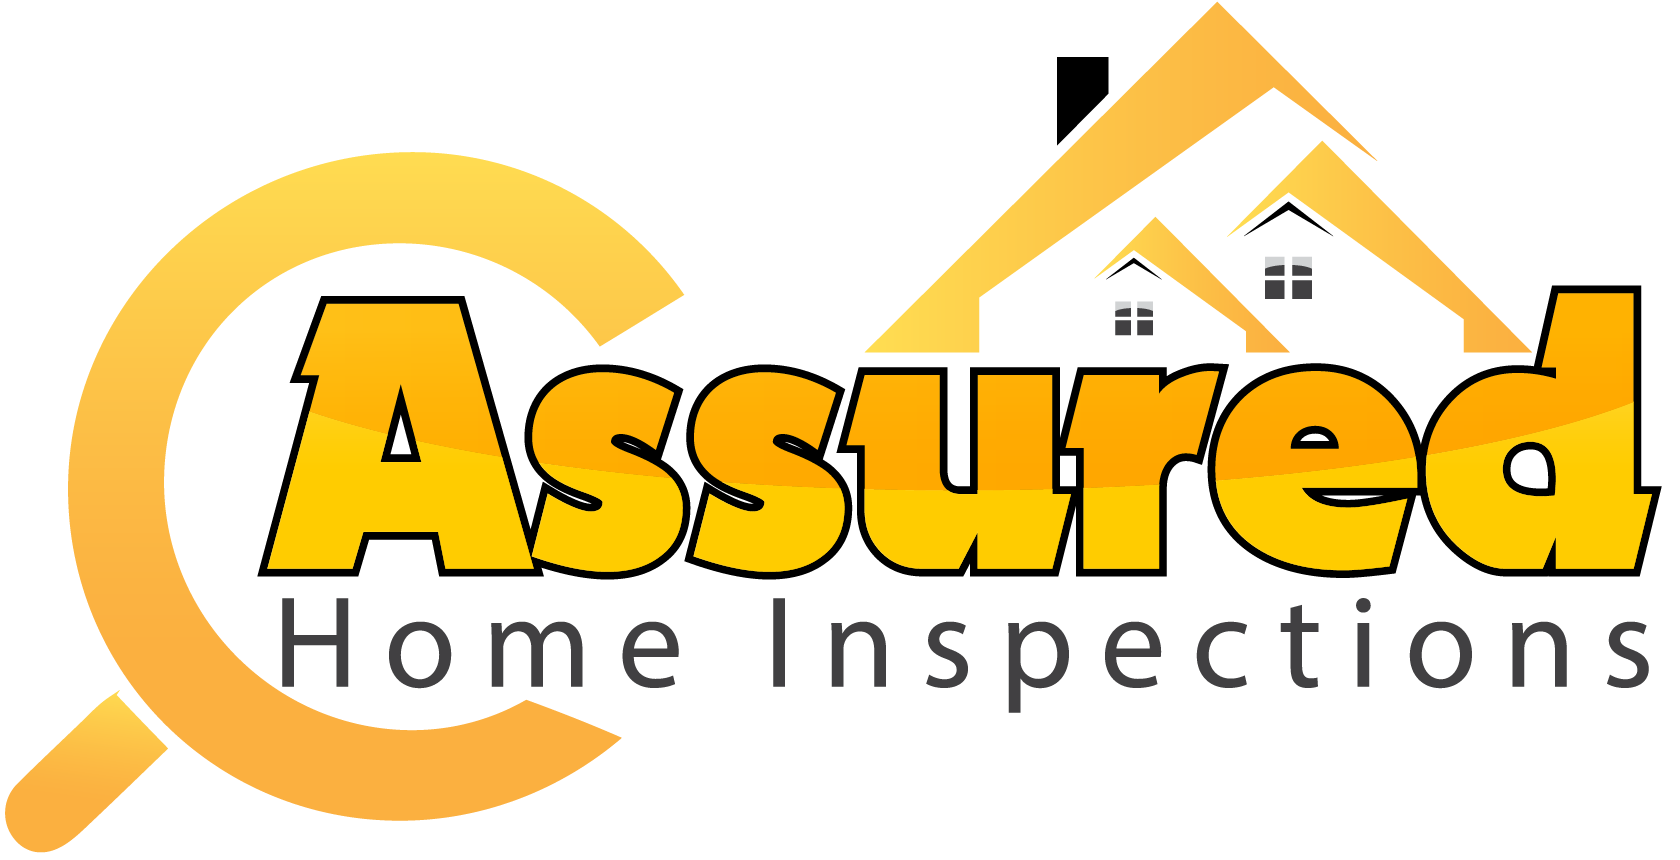 Wenonah, N.J. Home Inspections